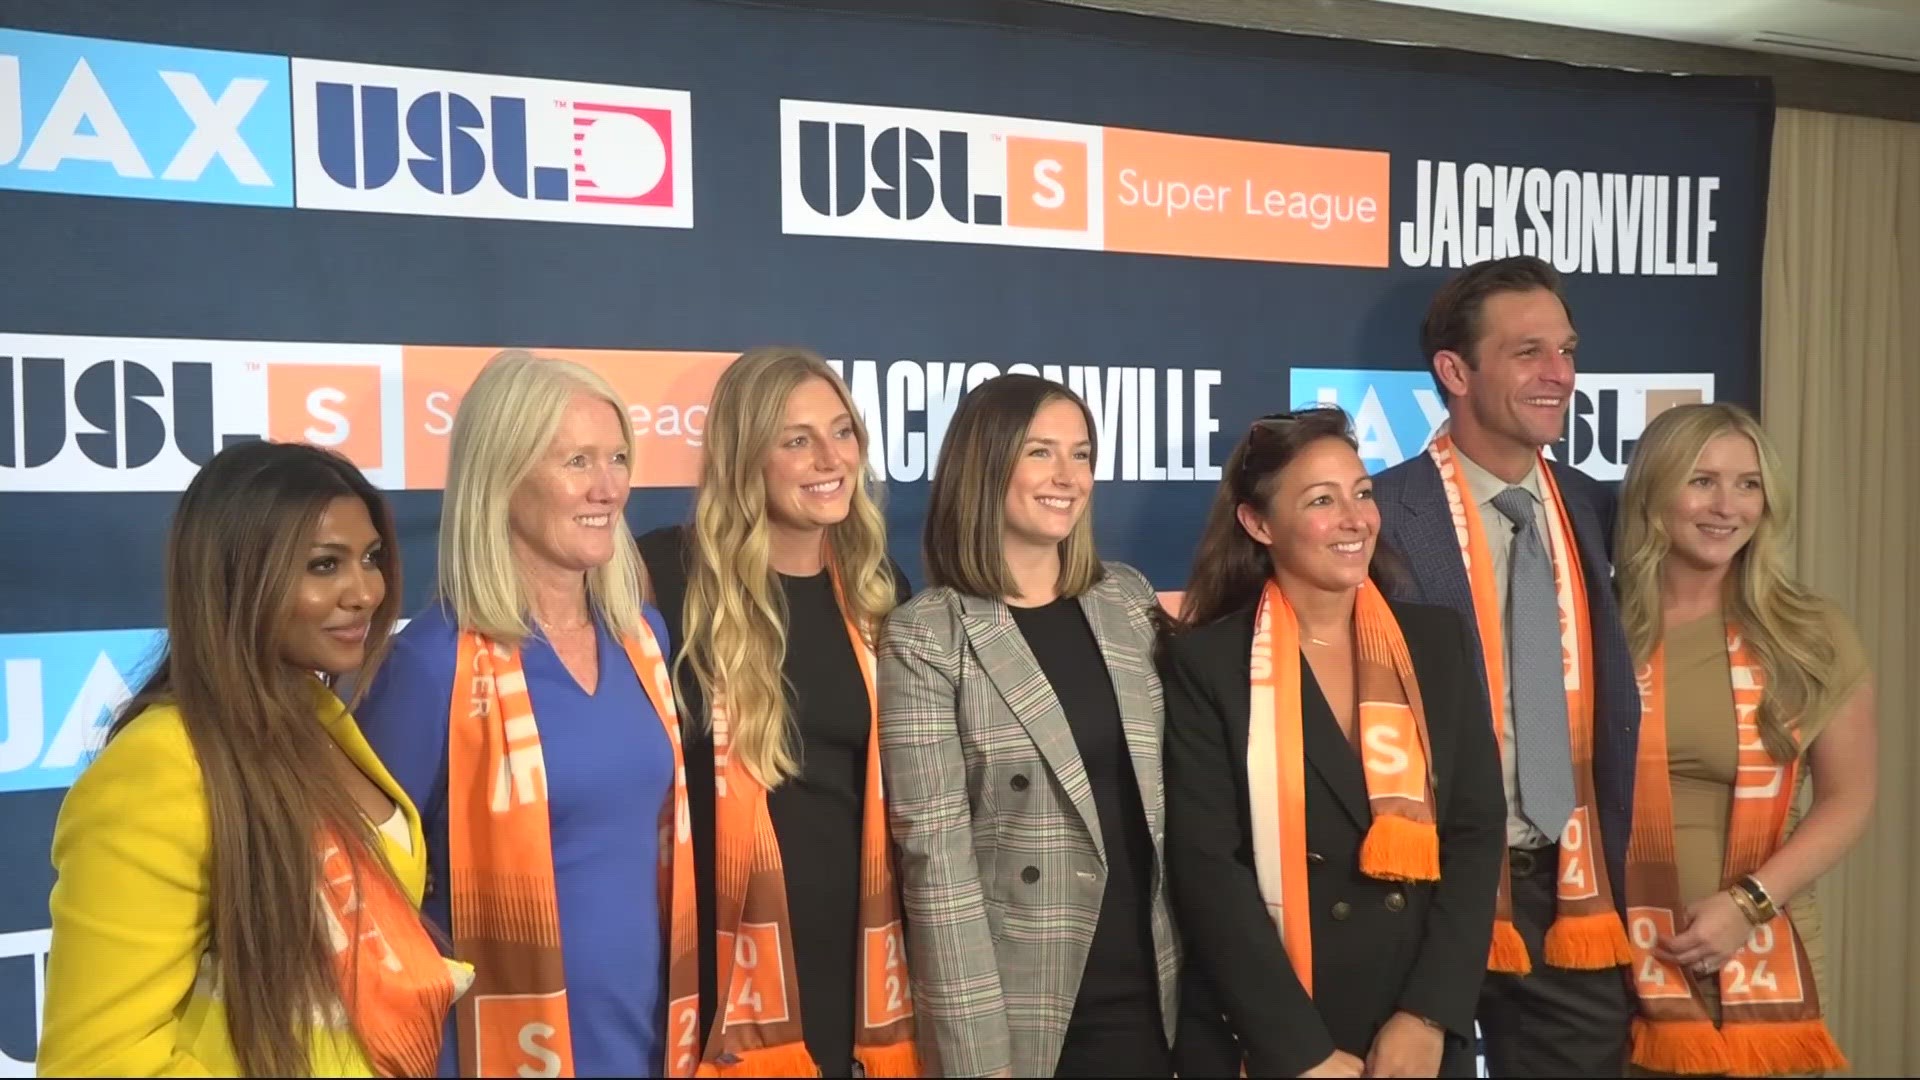 JAXUSL's goal is to bring professional USL men's and women's soccer to Jacksonville by 2025 or 2026. They're even working on a new home stadium.